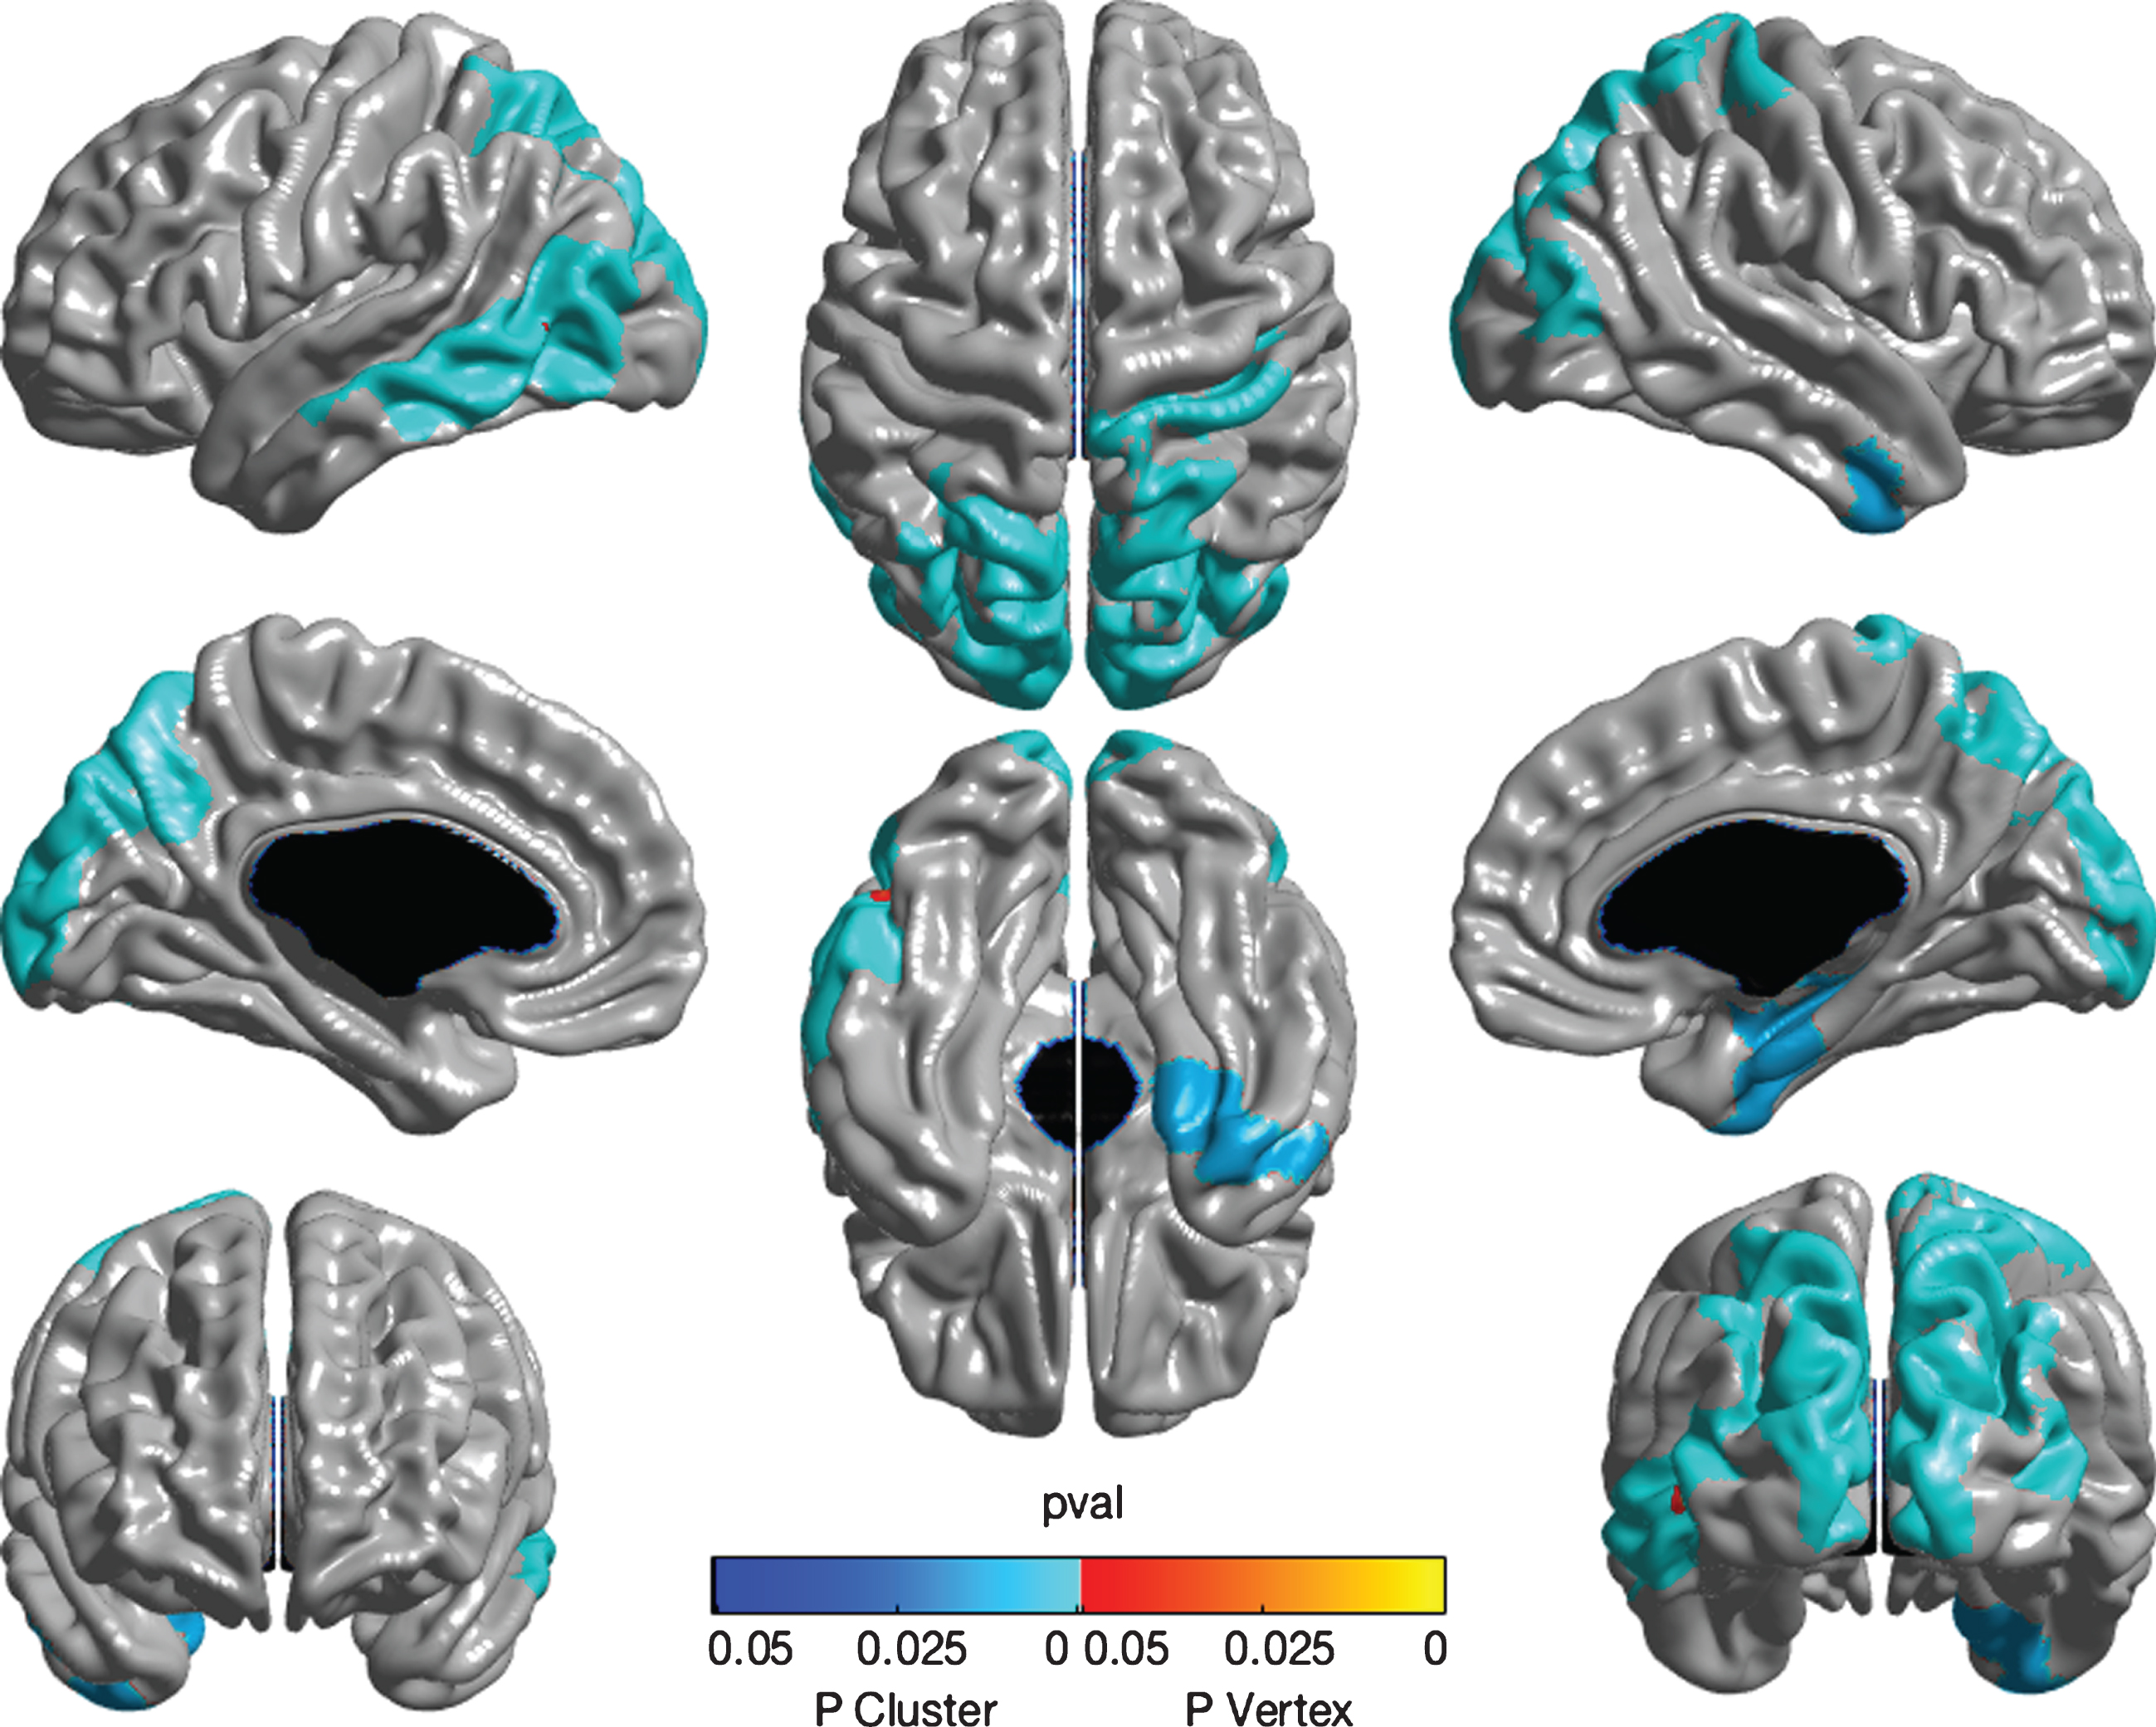 Whole brain cortical thickness measures associated with SSI-ICM. The figure displays a color map representing results of whole brain random-field theory cortical thickness analysis. The images, in sequence from top left, show left-lateral, dorsal, right-lateral, left-mesial, ventral, and right-mesial views, while the lower images show coronal views from rostral (left) and caudal (right) perspectives. Analyses adjusted for age, gender, education, APOE ɛ4 status, and tone test. The adjusted SSI-ICM score displayed a positive relationship with right Heschl’s gyrus at the peak level (indicated by red colored point). SSI-ICM score showed a positive relationship with thickness of the left and right precuneus, with extension to adjacent inferior parietal and occipital cortices. Also of interest are positive associations with right parahippocampal and entorhinal cortices, as well as left inferior and mid temporal gyri. All these areas are displayed as blue colored areas and are statistically significant as clusters.